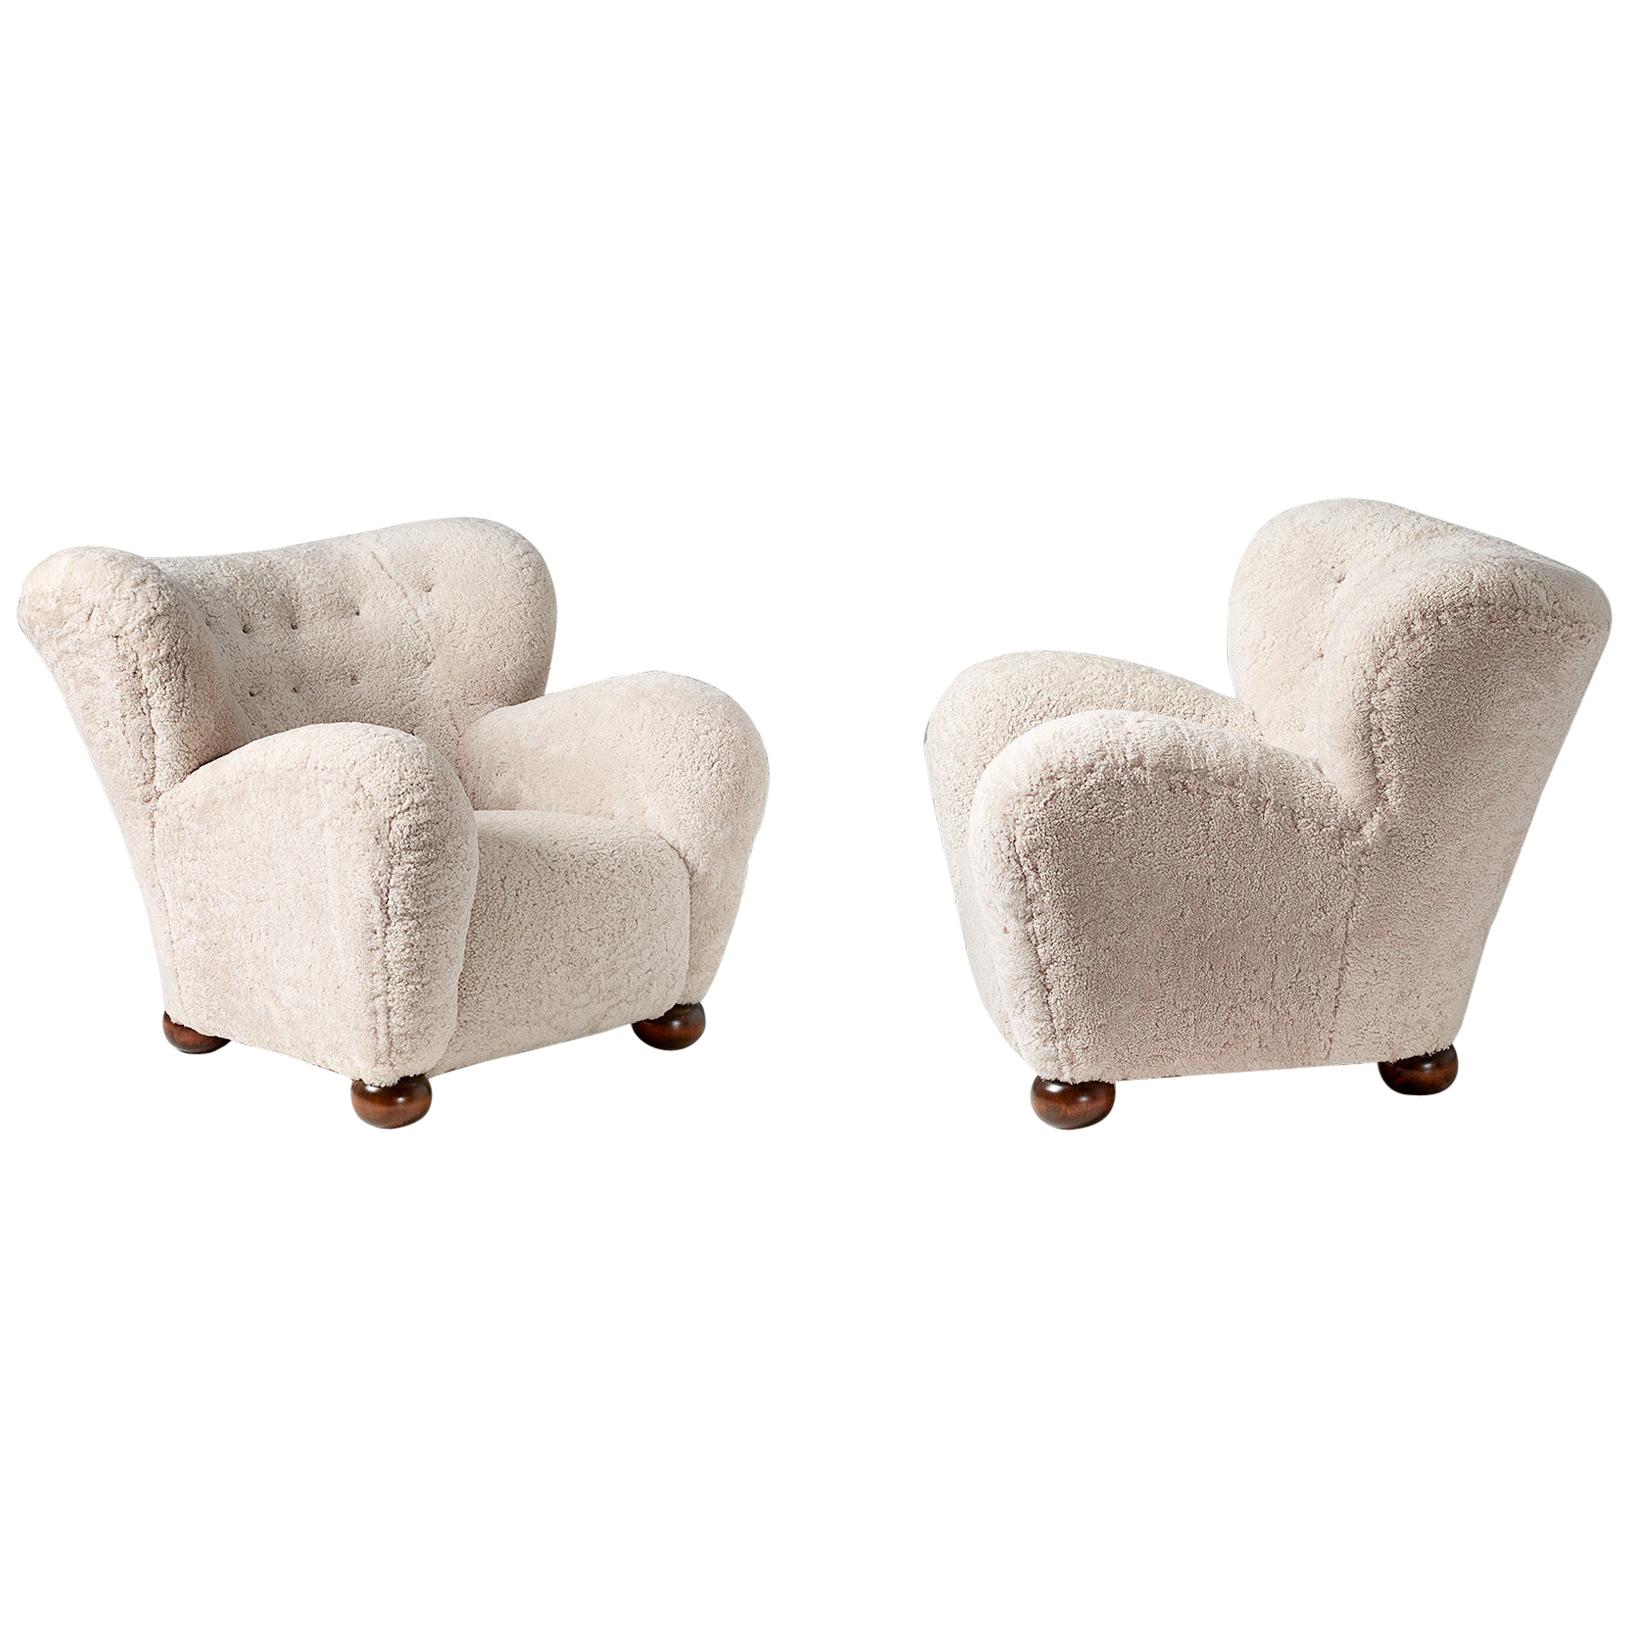 Pair of Marta Blomstedt 1930s Sheepskin Wing Chairs for The Hotel Aulanko